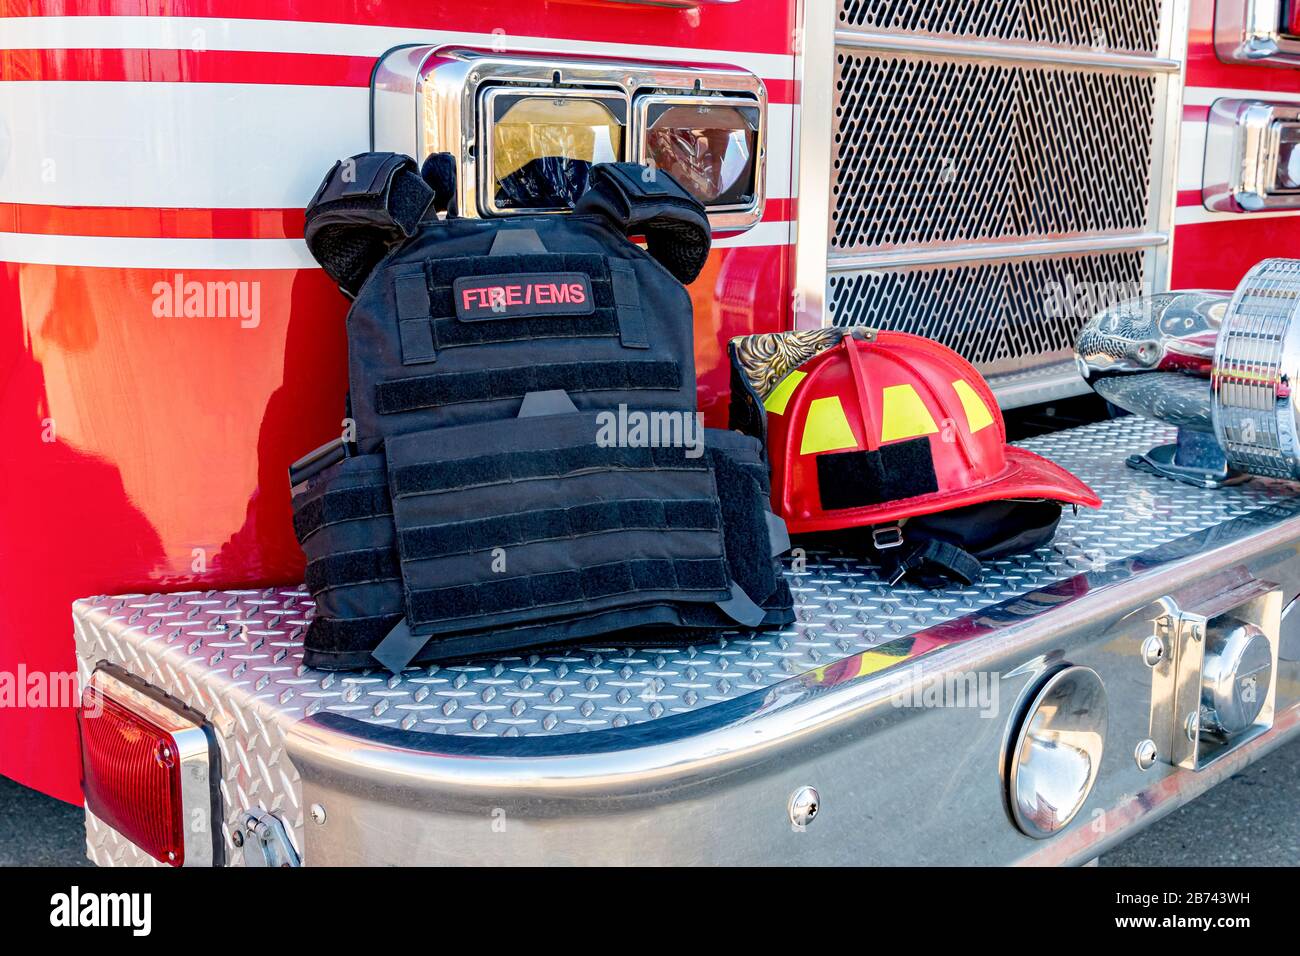 ballistic vest and red firefighter helmet on fire truck bumper. Concept of mass casualty shooting, terrorism response of fire department Stock Photo